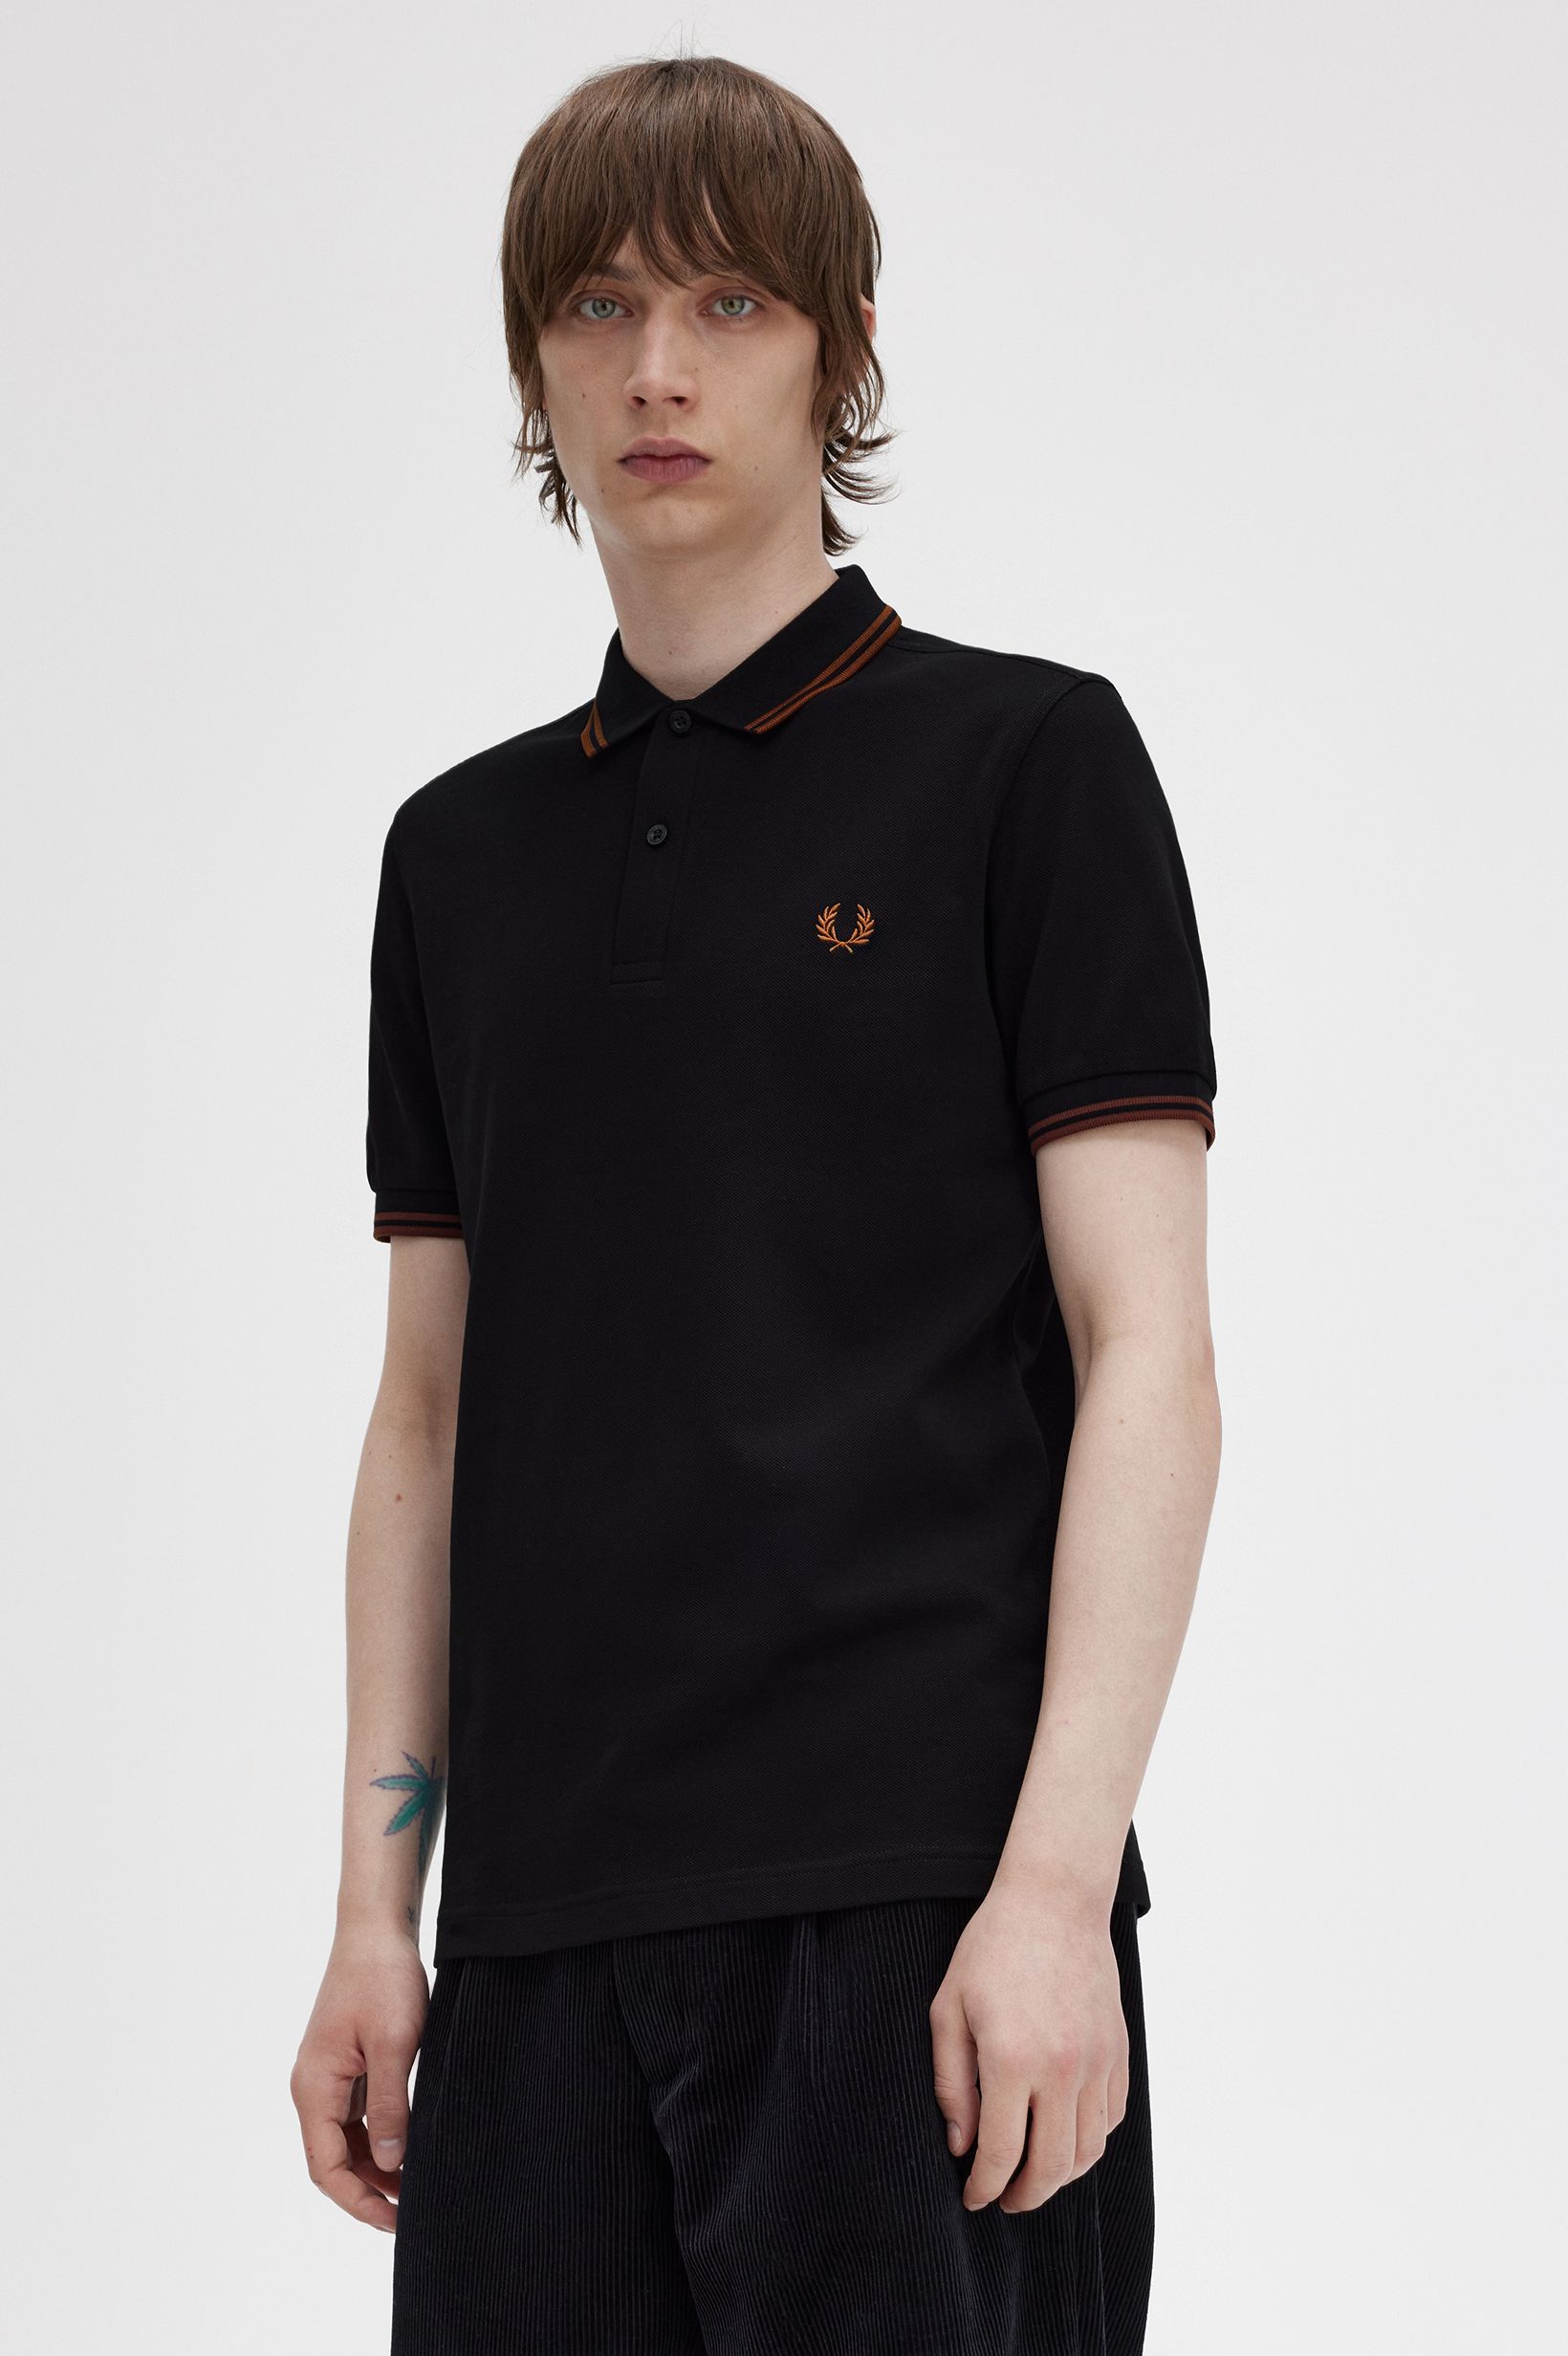 Fred Perry - TWIN TIPPED POLO SHIRT - Black/Whisky Brown